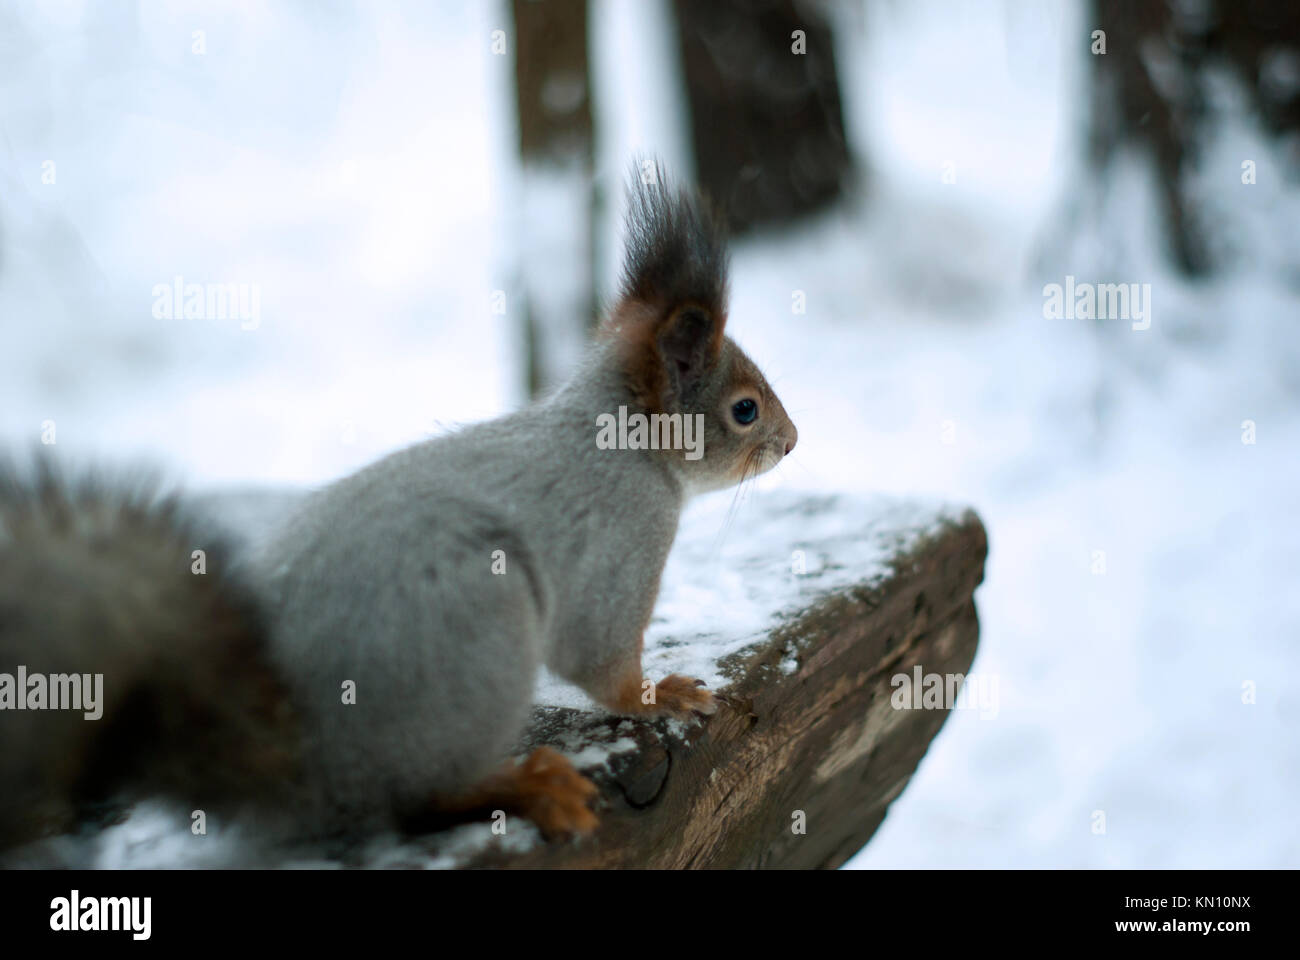 Eurasian red squirrel in grey winter coat with ear-tufts on the edge of a snow-covered bench in a blurred winter background closeup, only the muzzle i Stock Photo